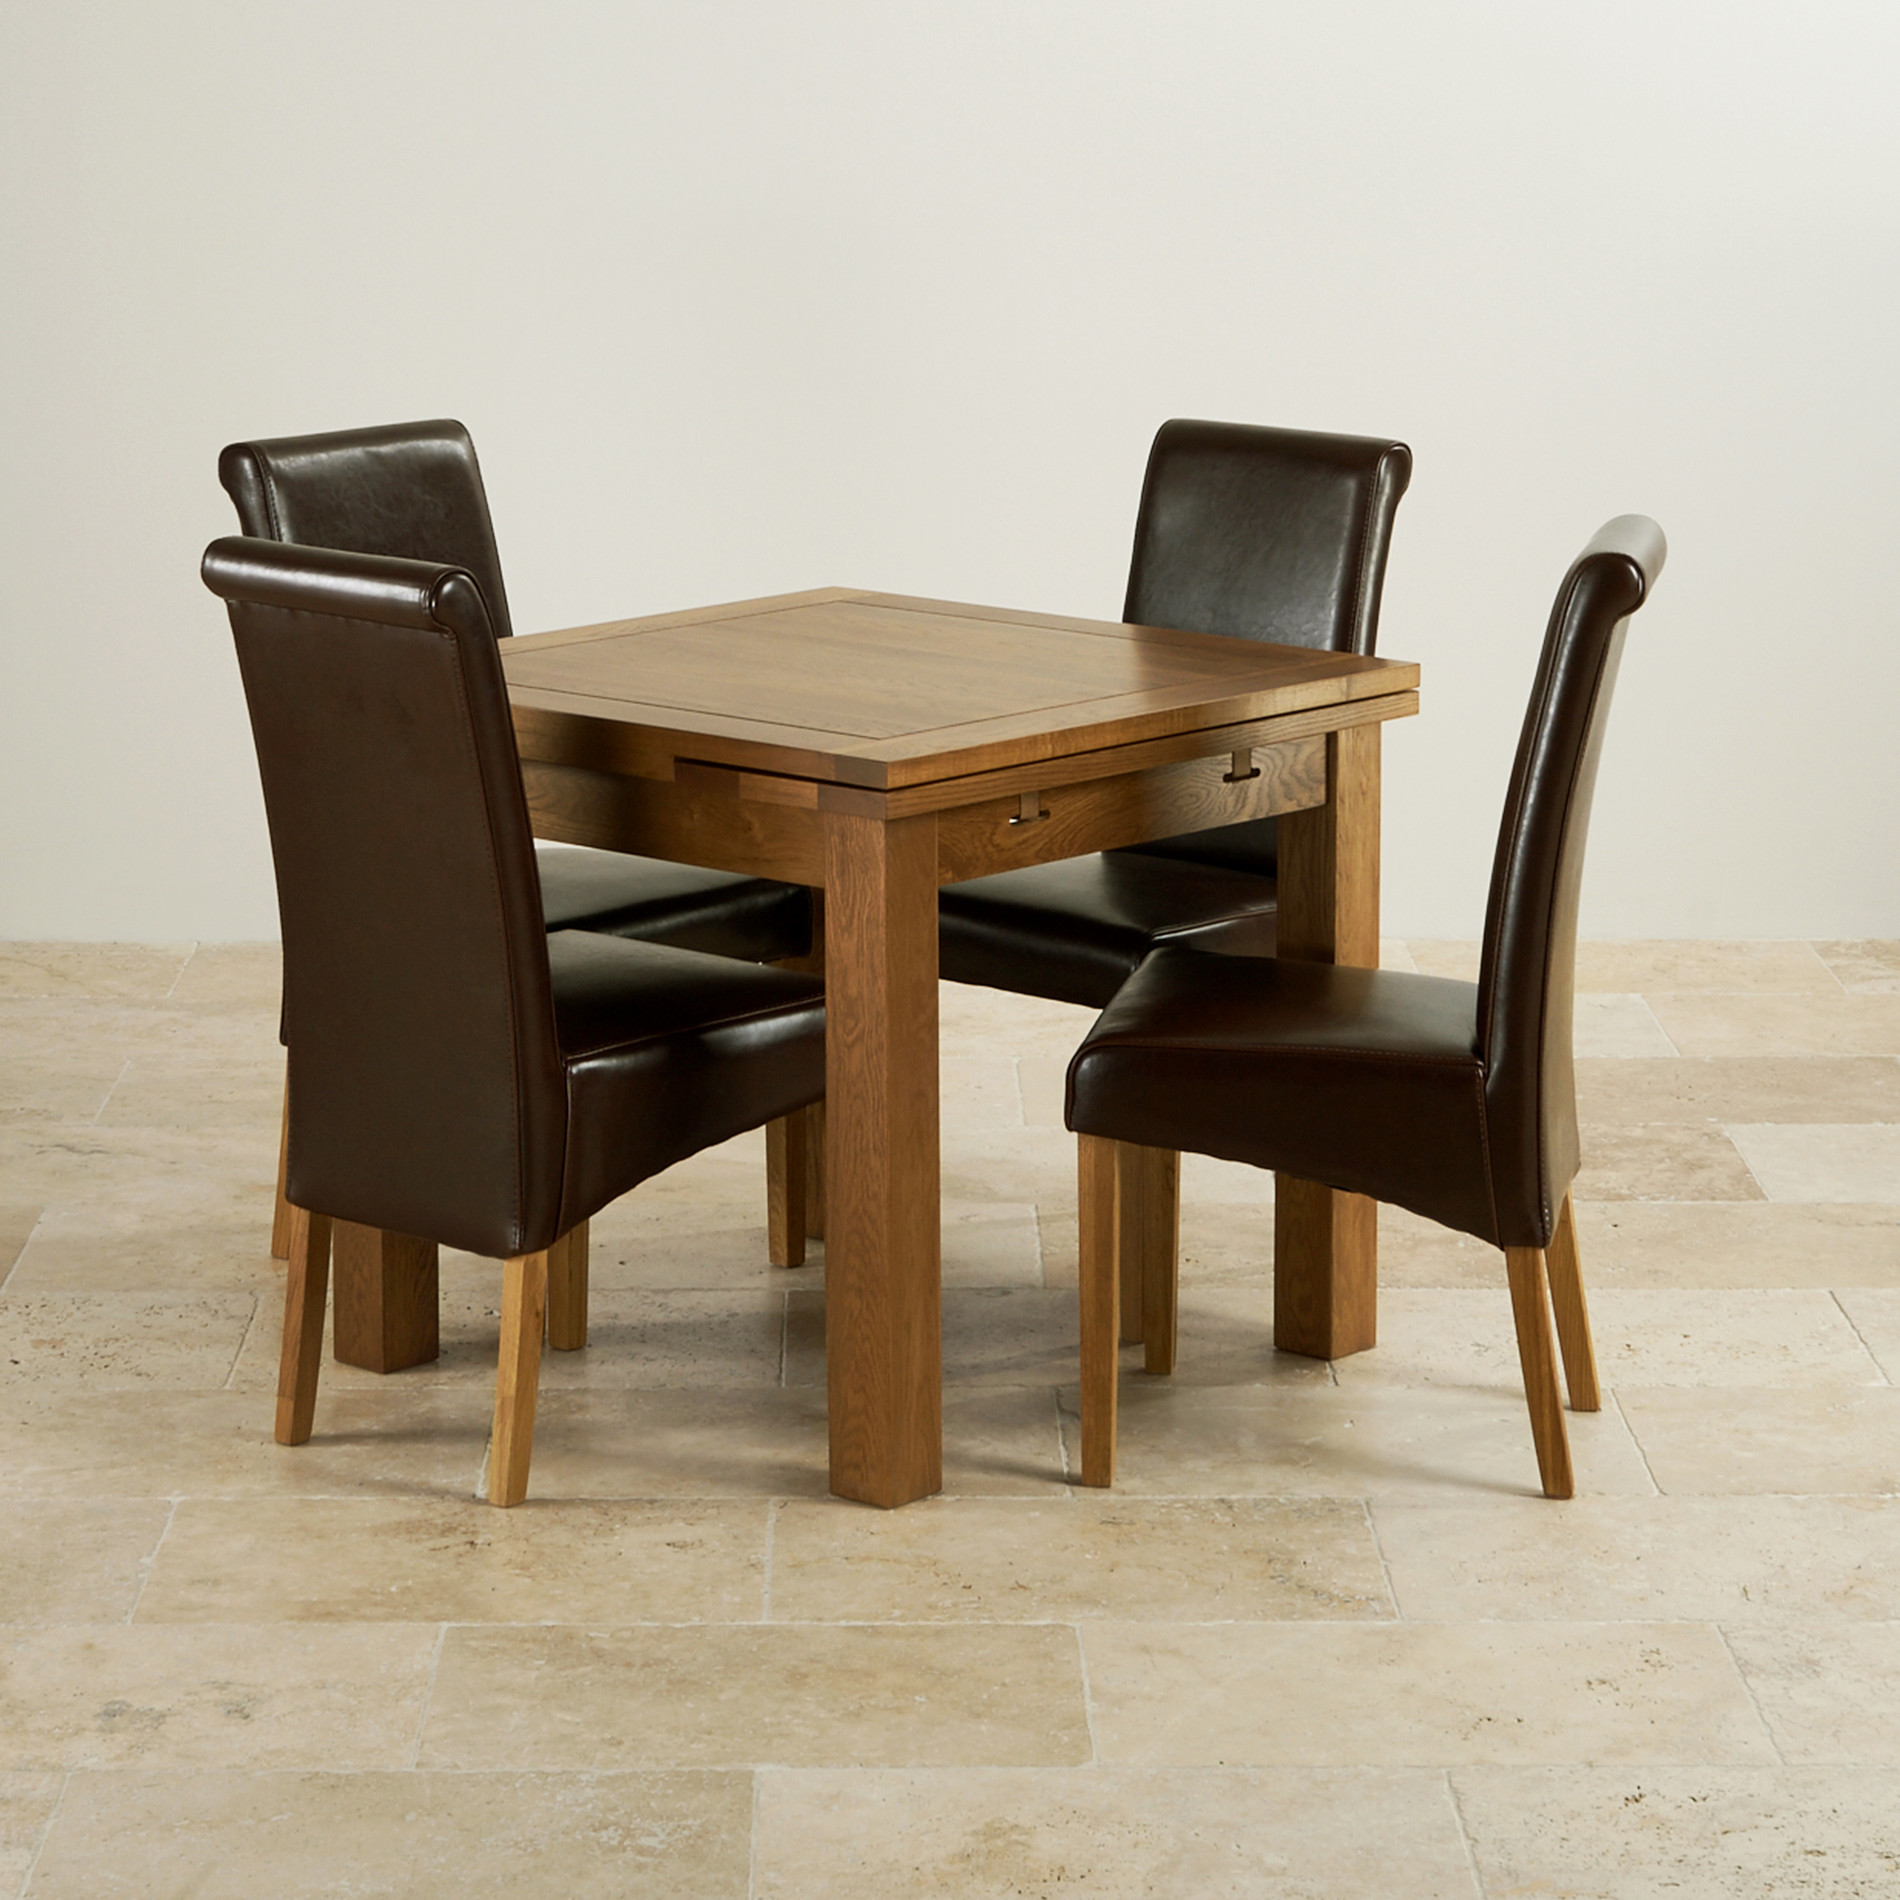 Rustic Oak Extending Dining Set - 3ft Table + 4 Leather Chairs